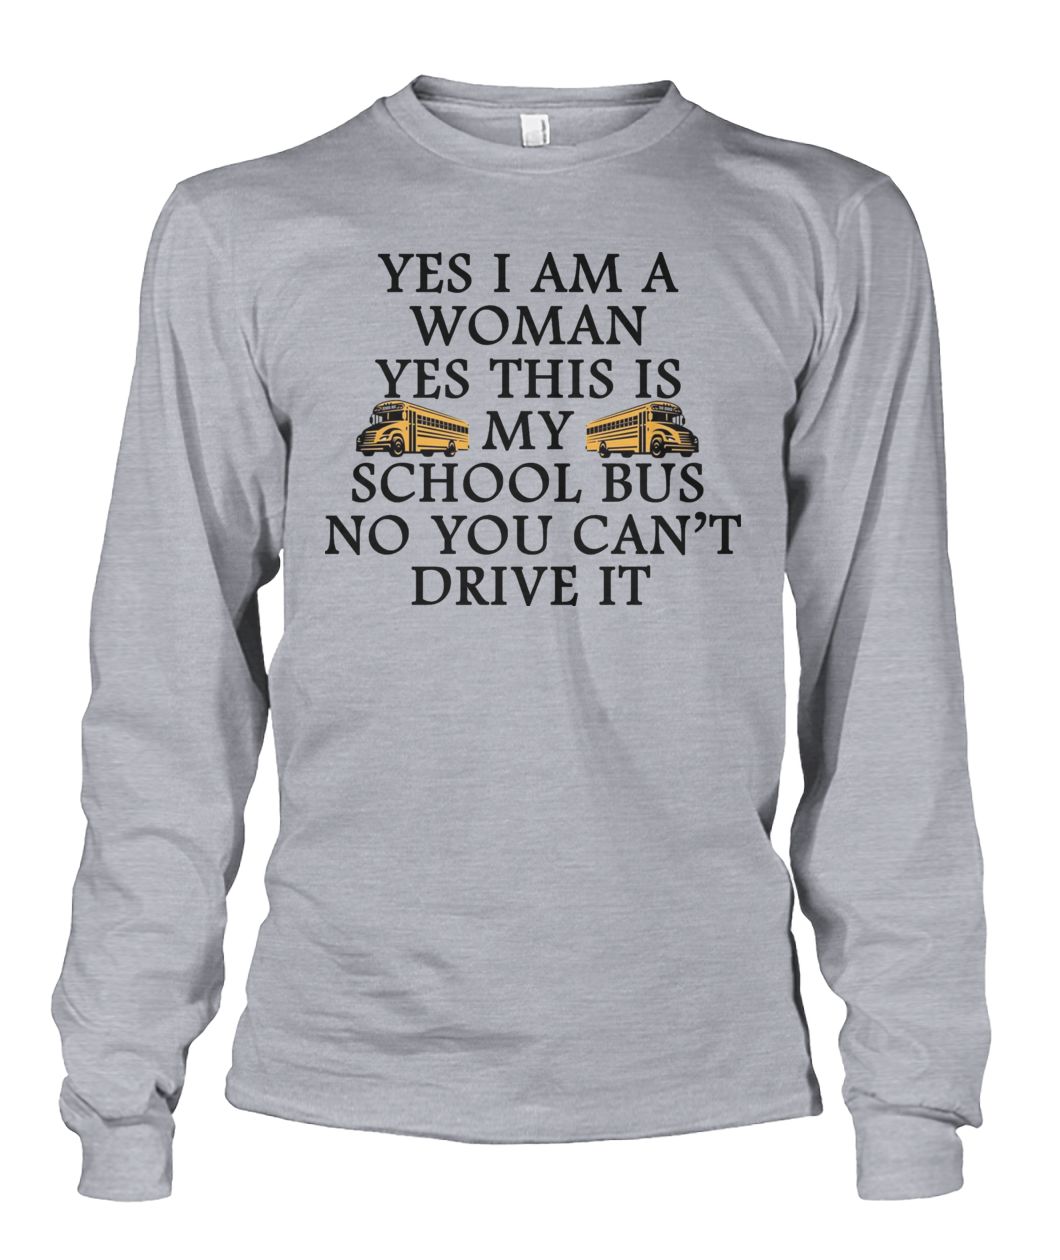 Yes I am a woman yes this is my school bus no you can't drive it unisex long sleeve